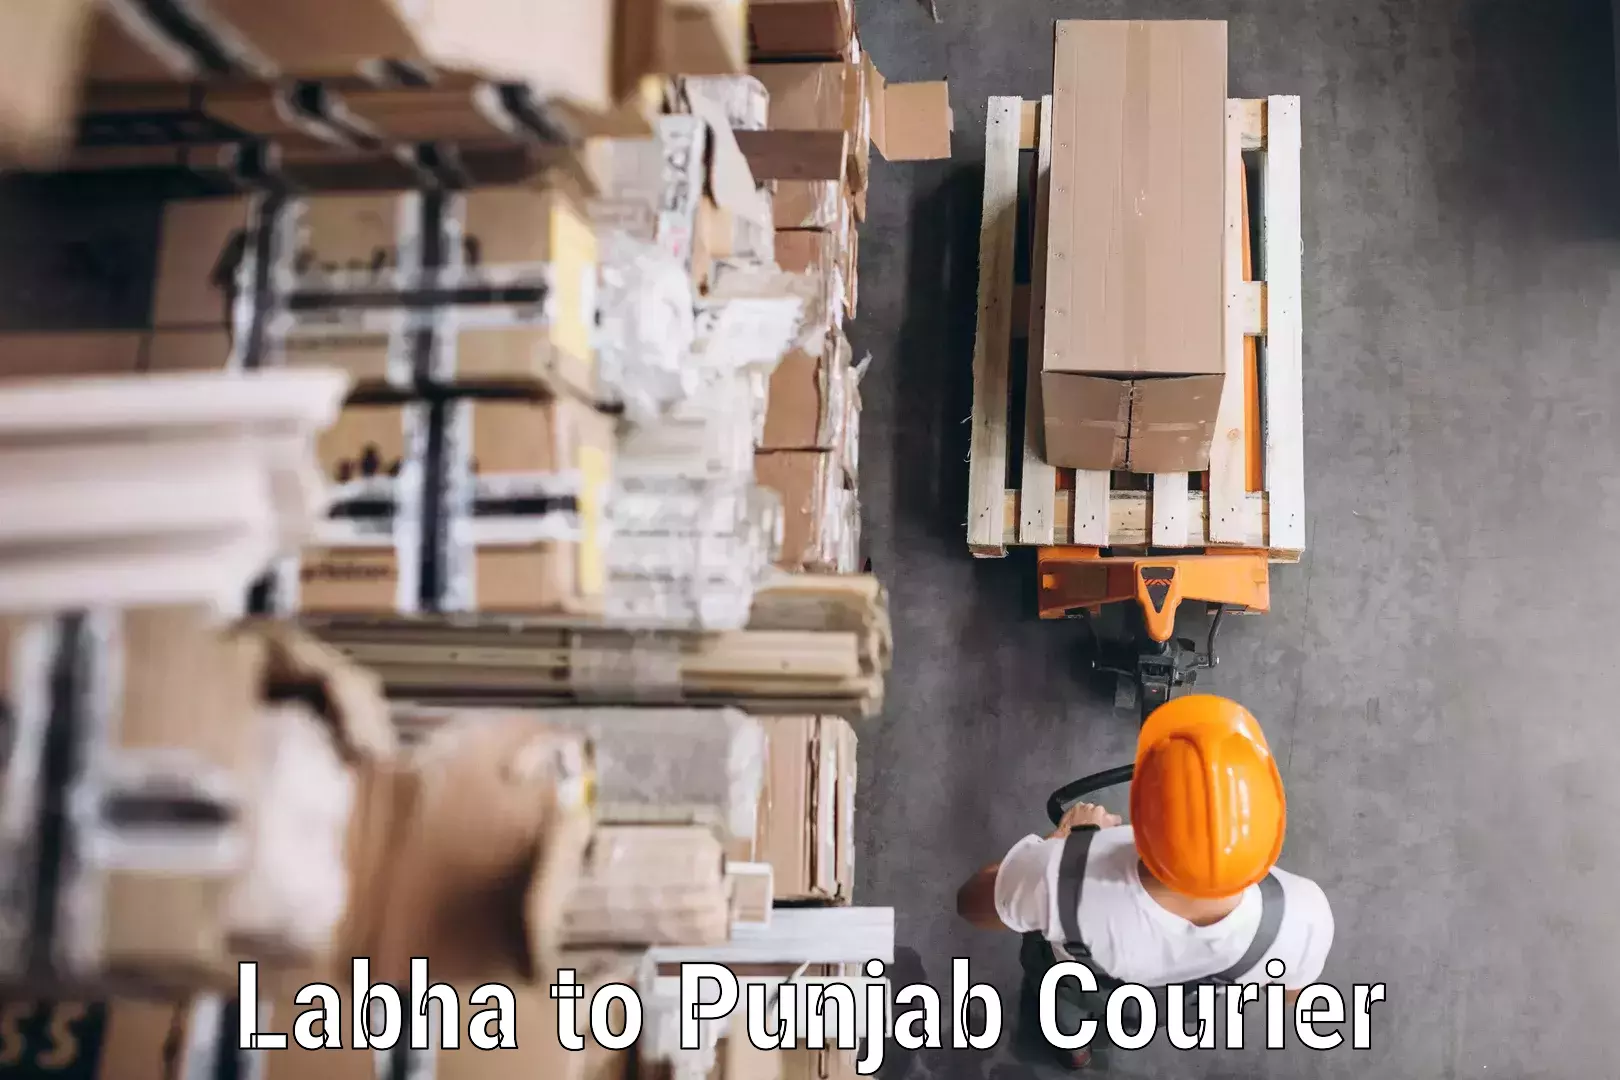 Comprehensive shipping network Labha to Amritsar